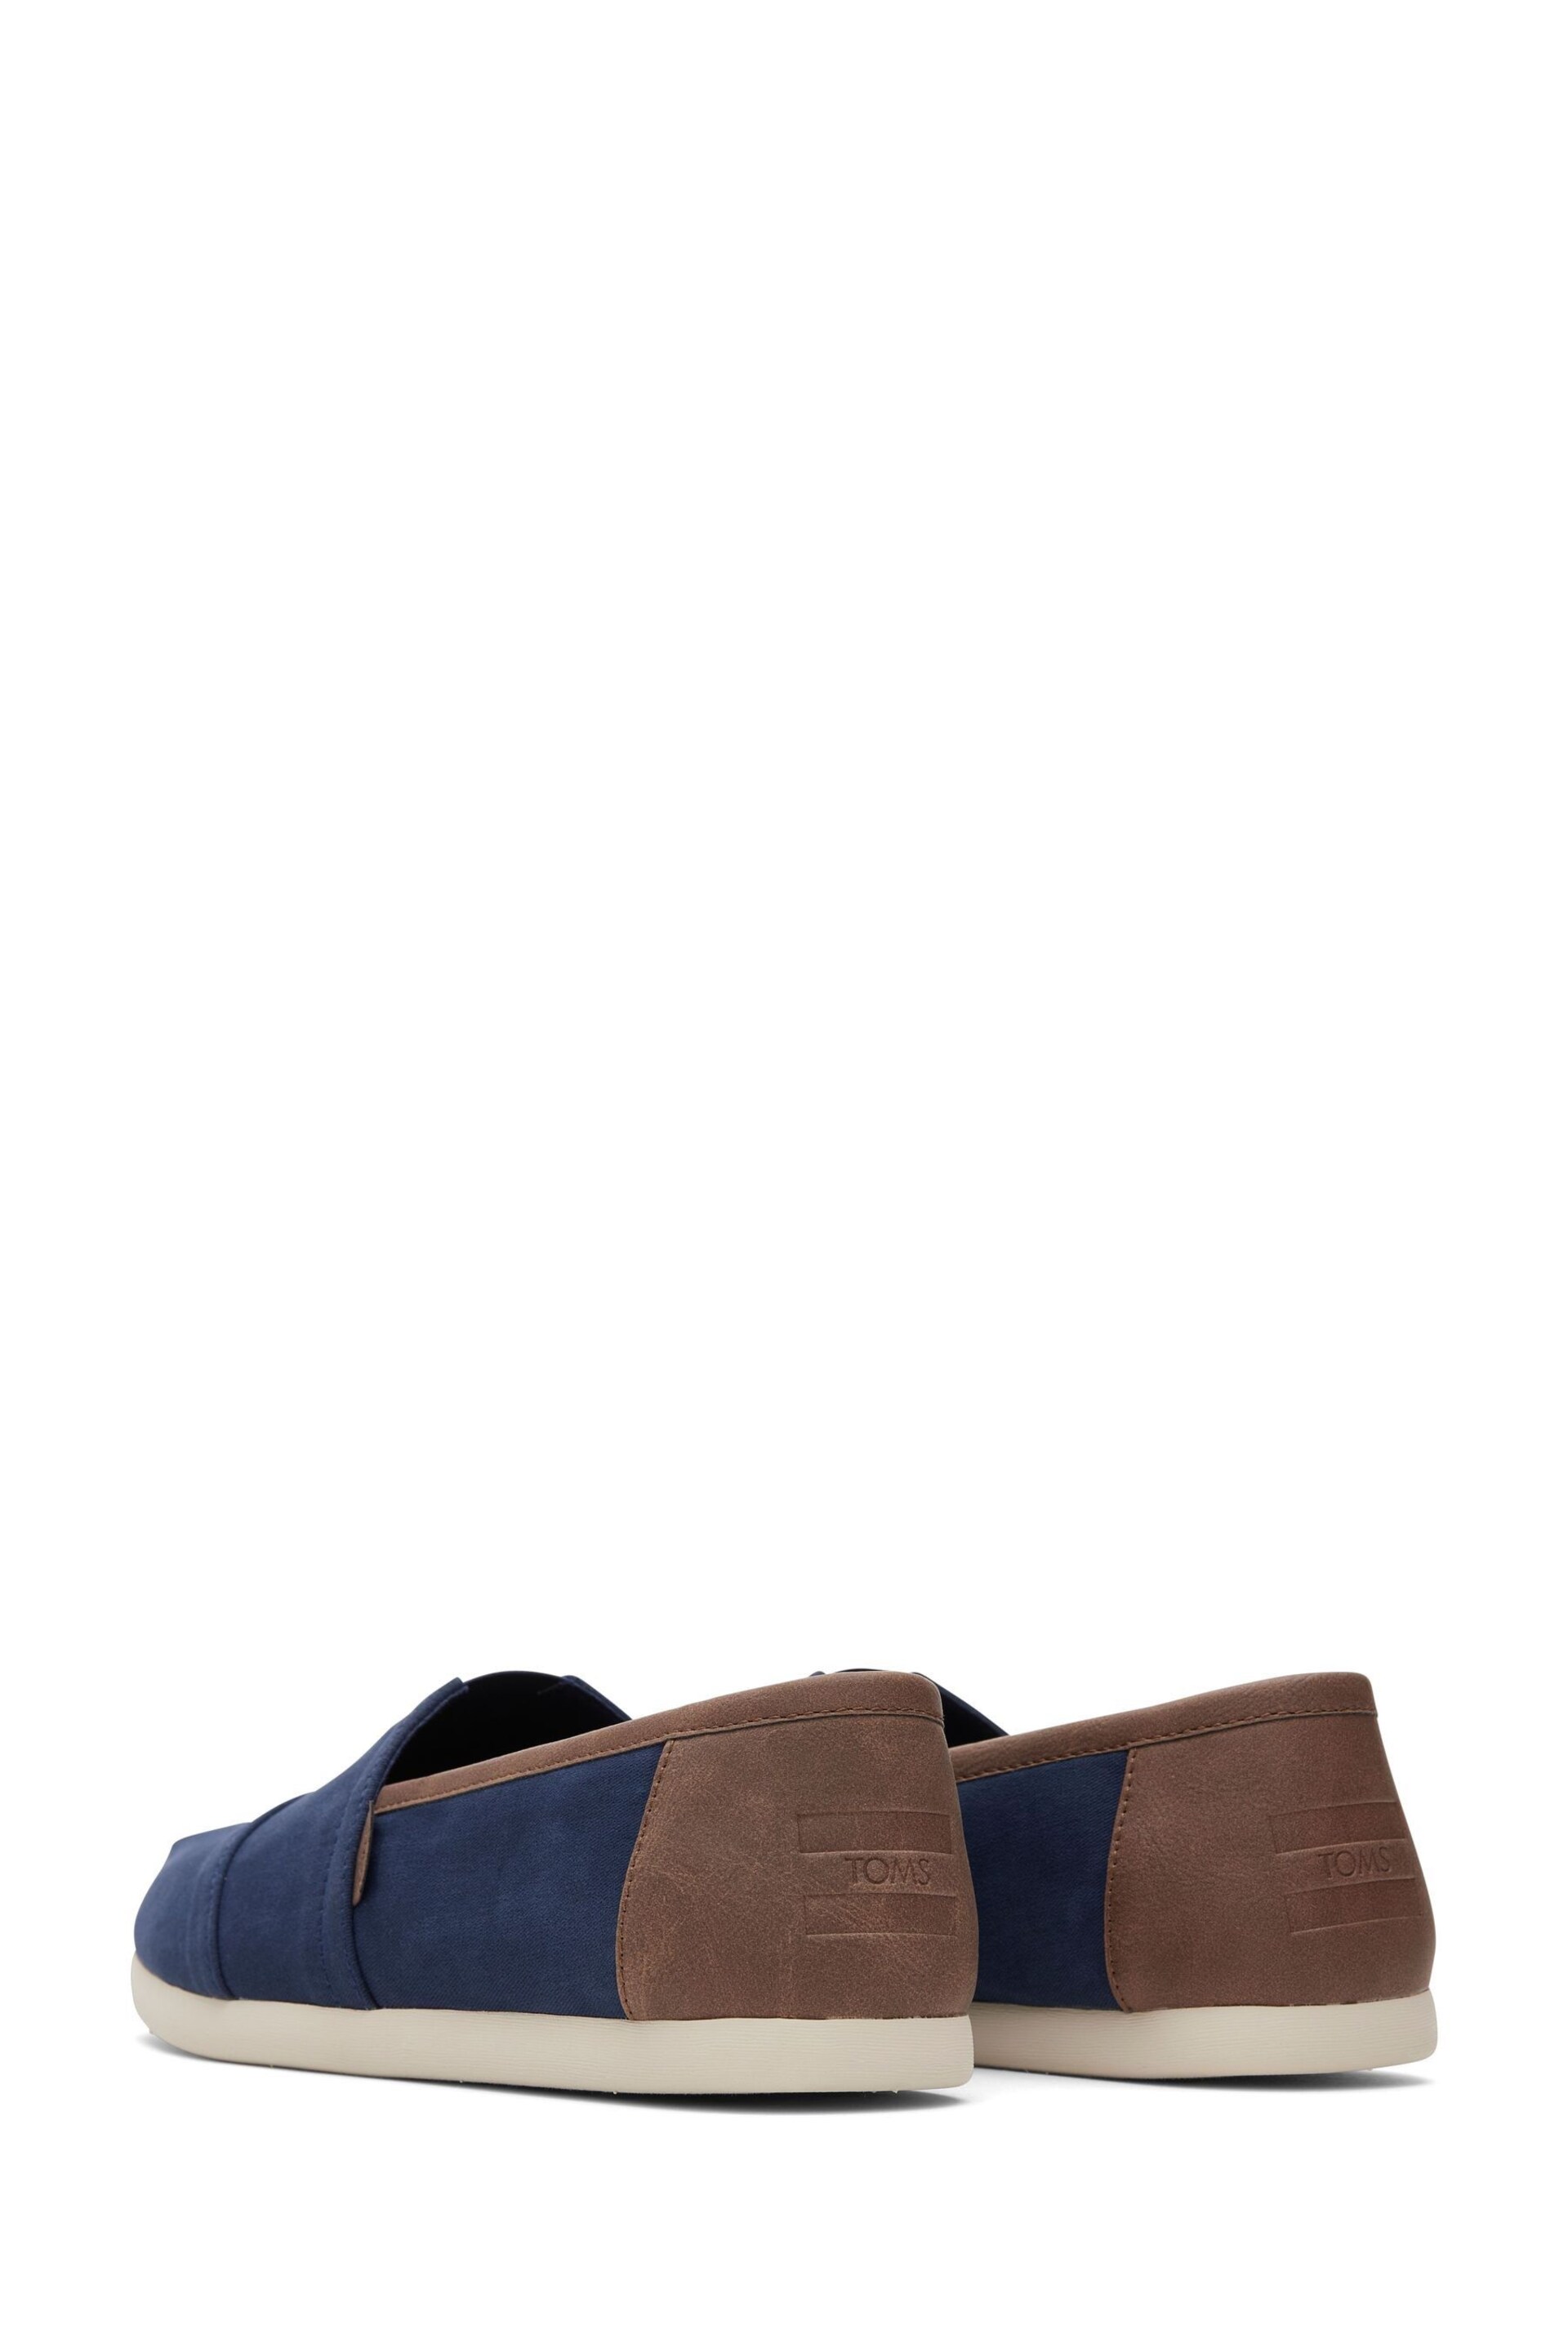 TOMS Vegan Alpargata Shoes in Navy Twill - Image 4 of 6